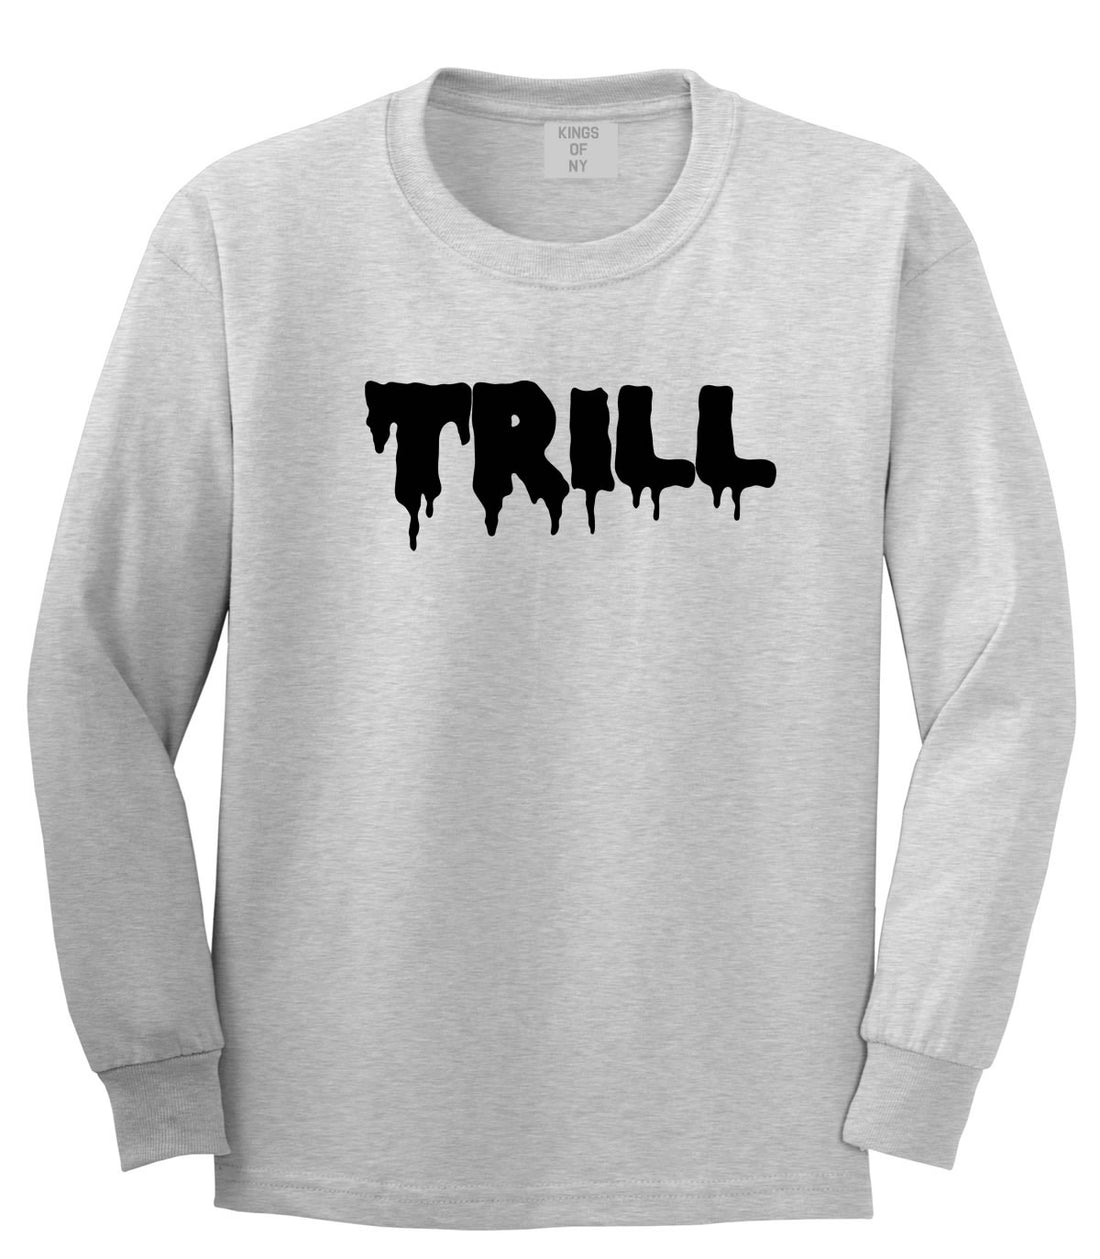 Trill Blood New York Bx Been Style Fashion Long Sleeve Boys Kids T-Shirt In Grey by Kings Of NY